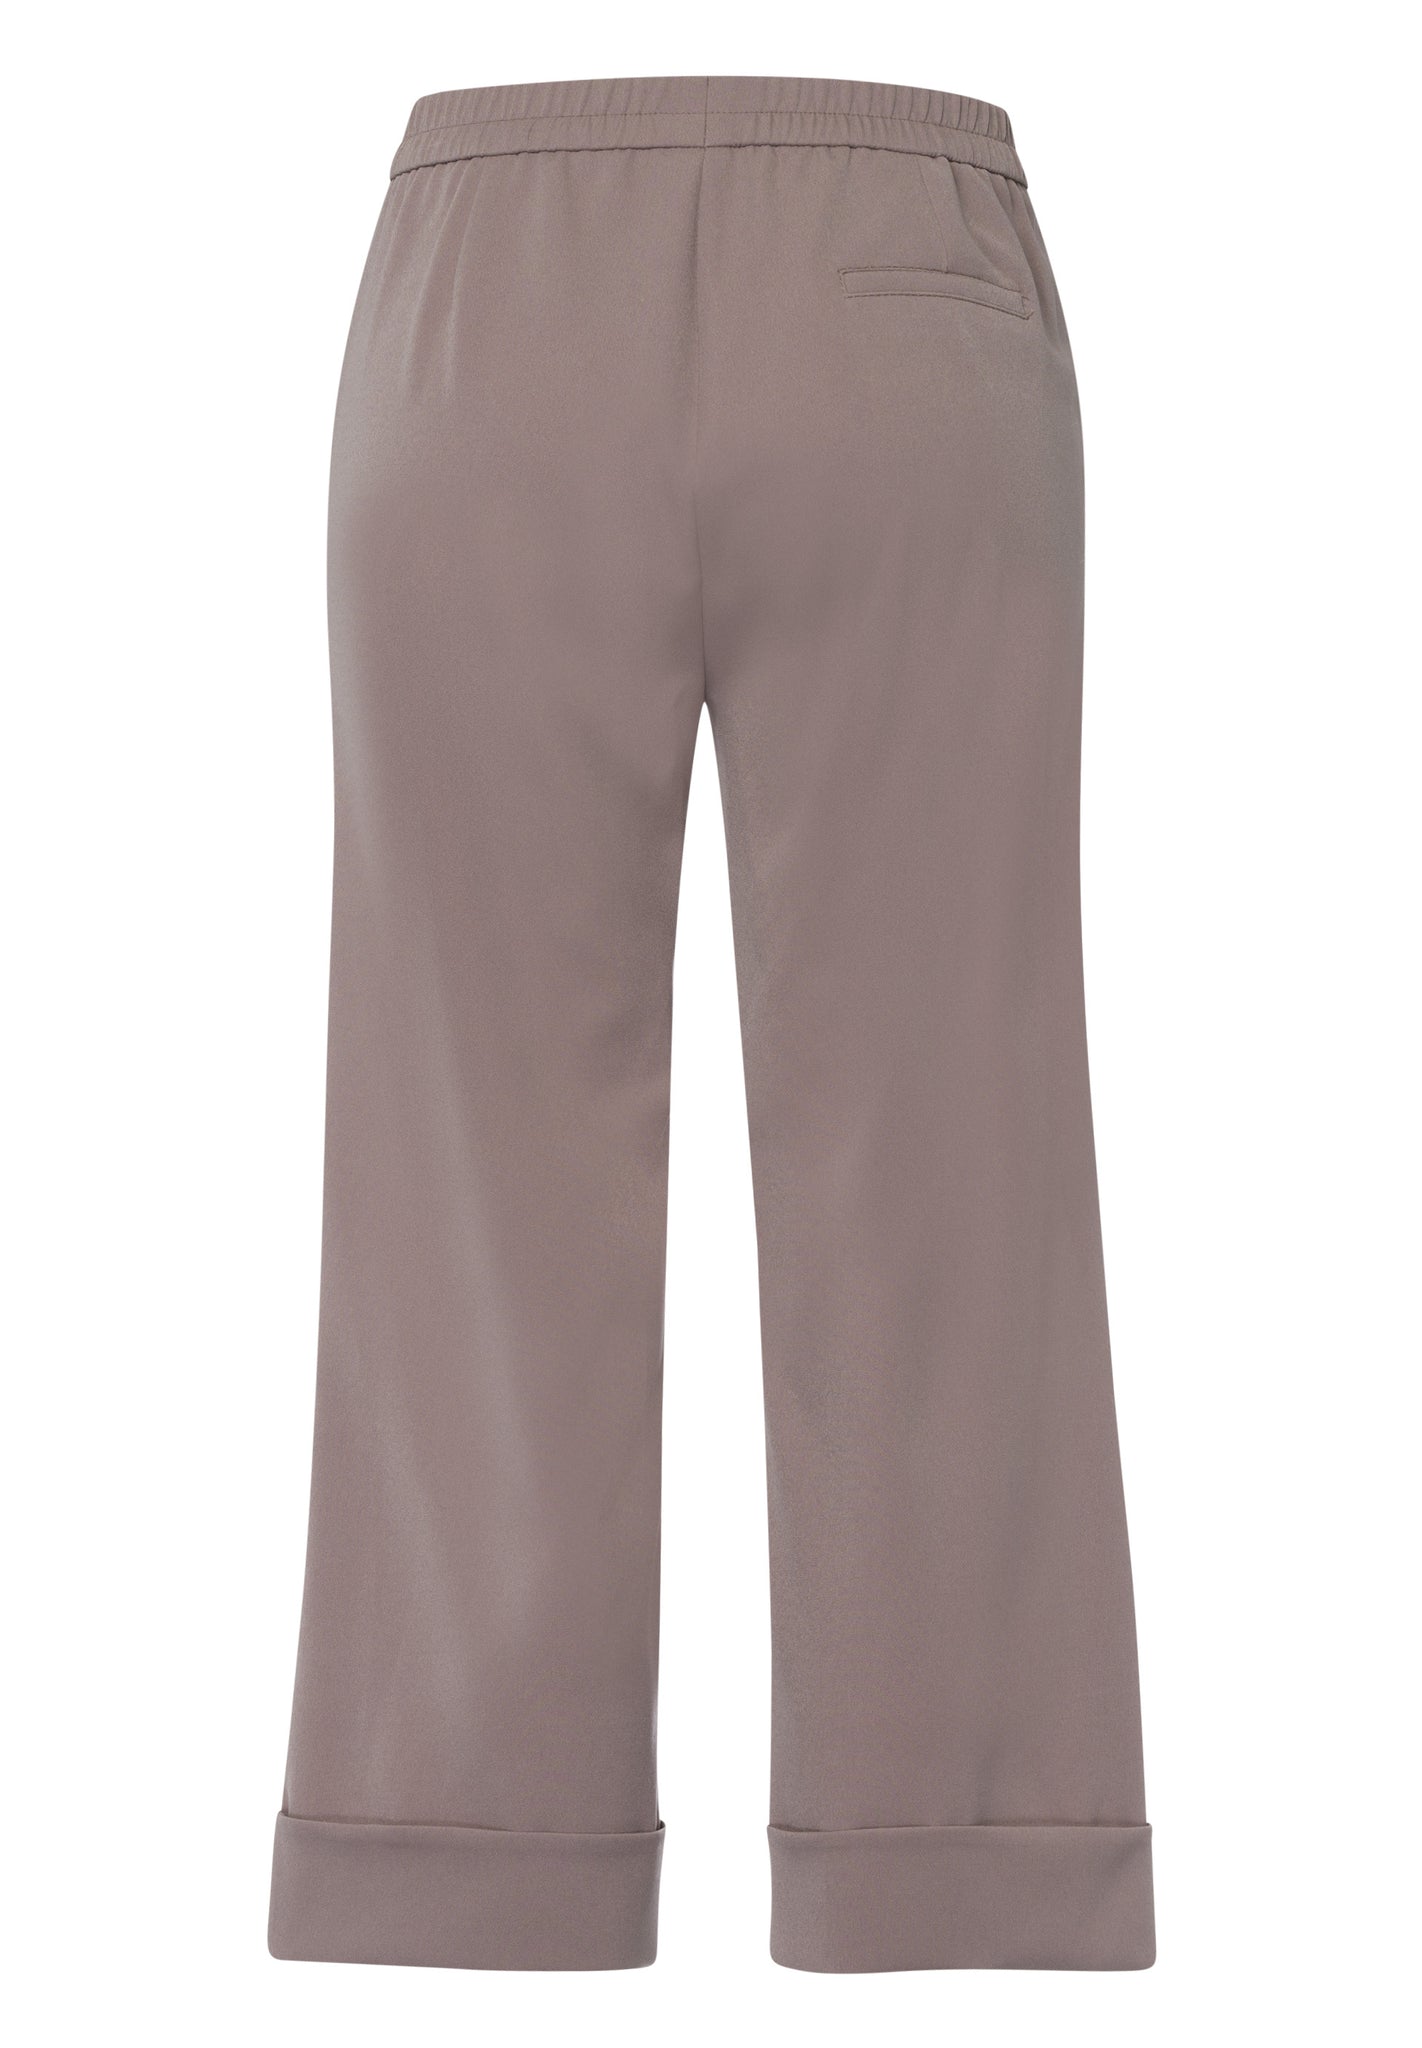 Frank Walder Mia turn-up trousers, product code 602.610